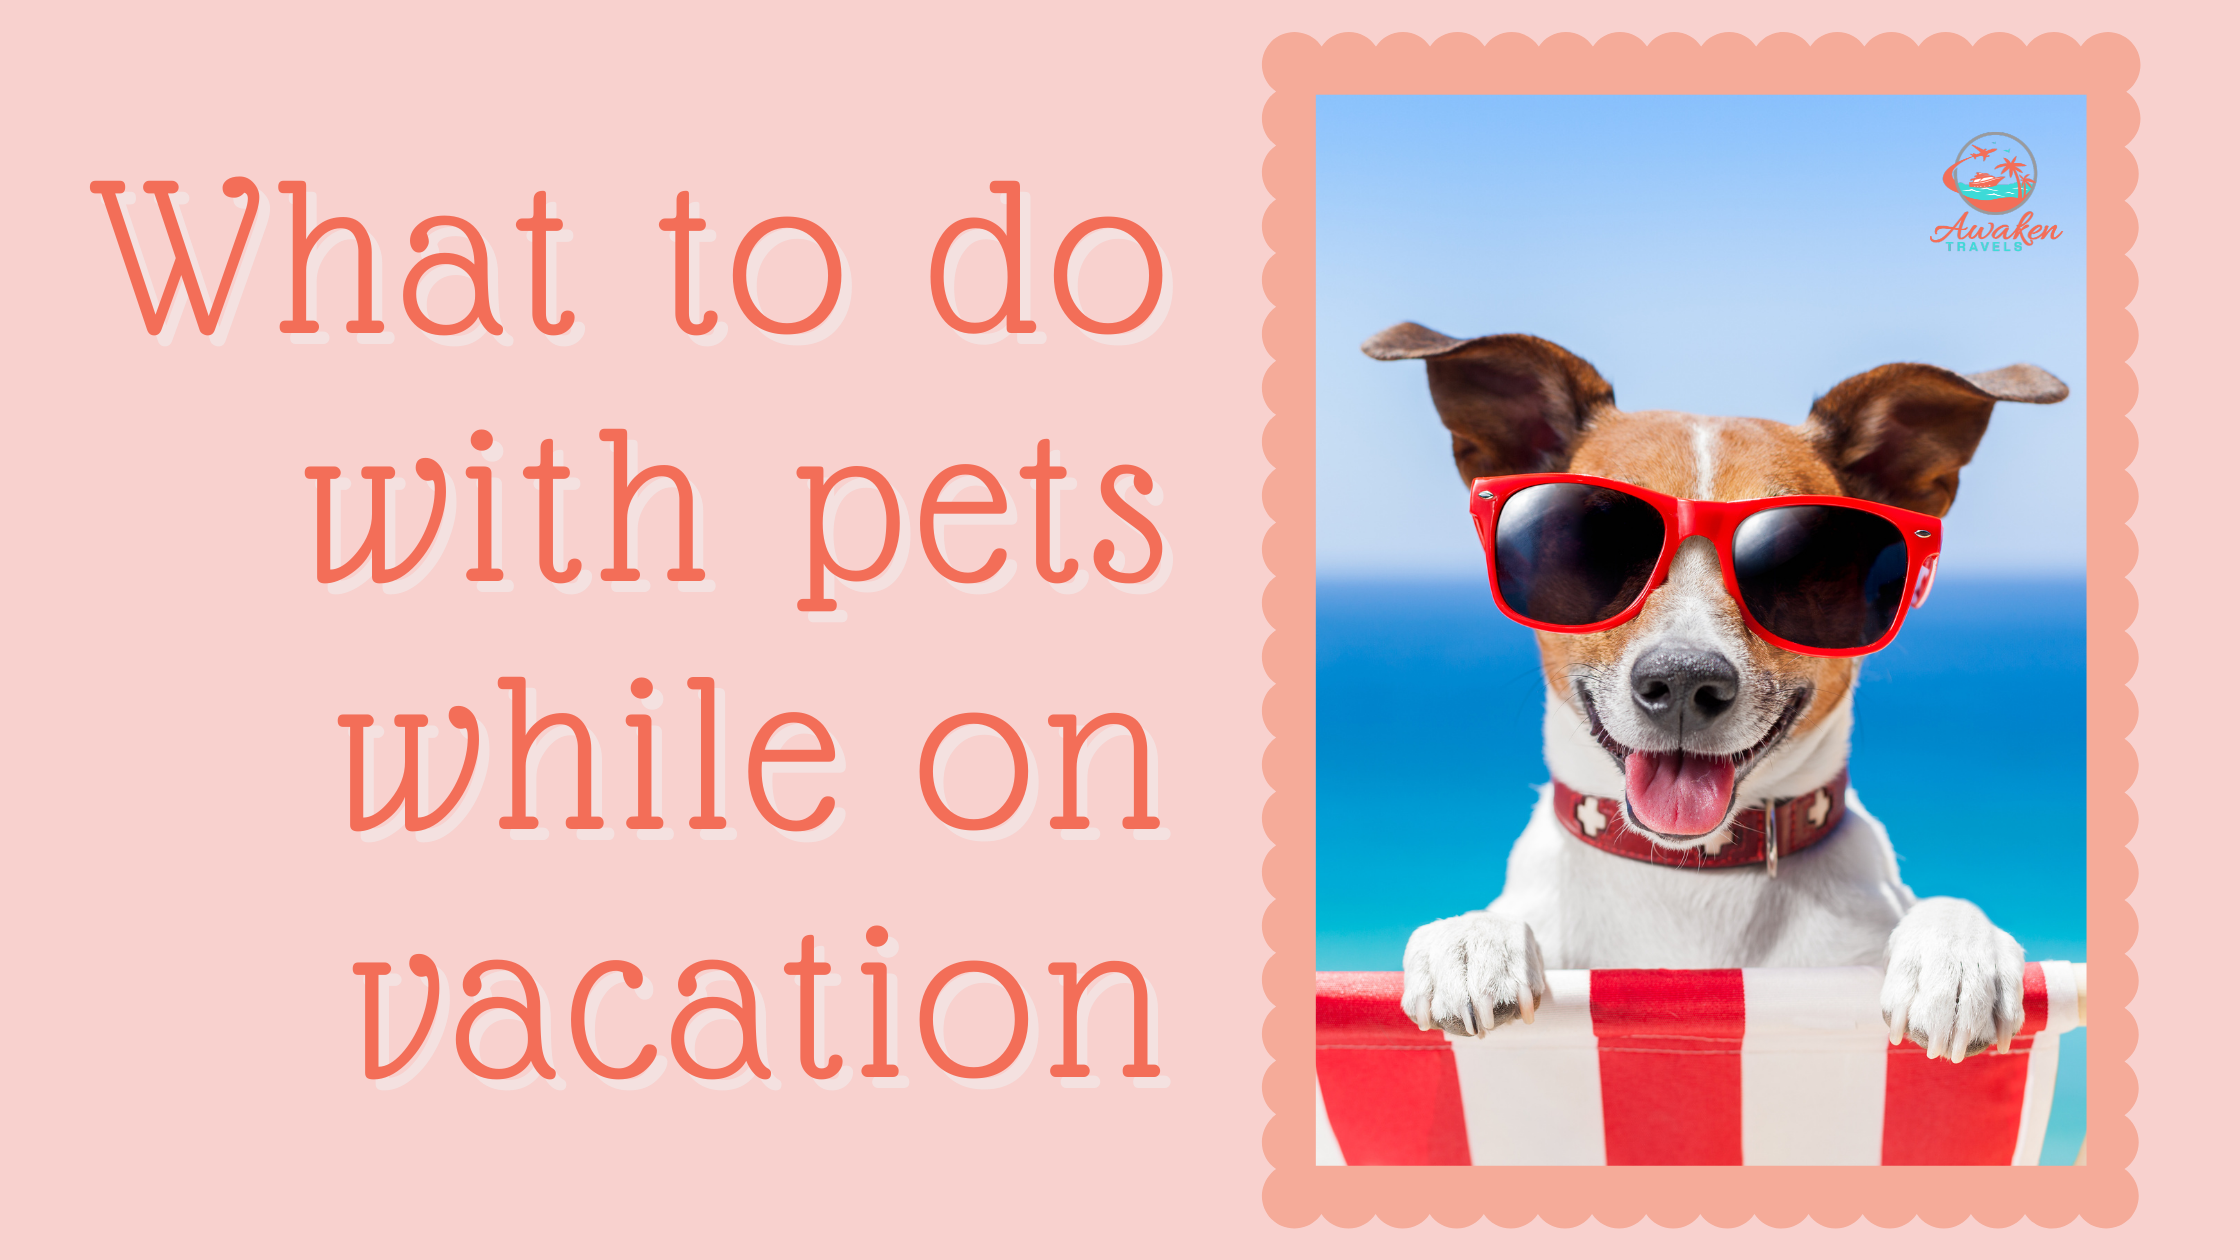 Expert tips for what to do with your pets while on vacation